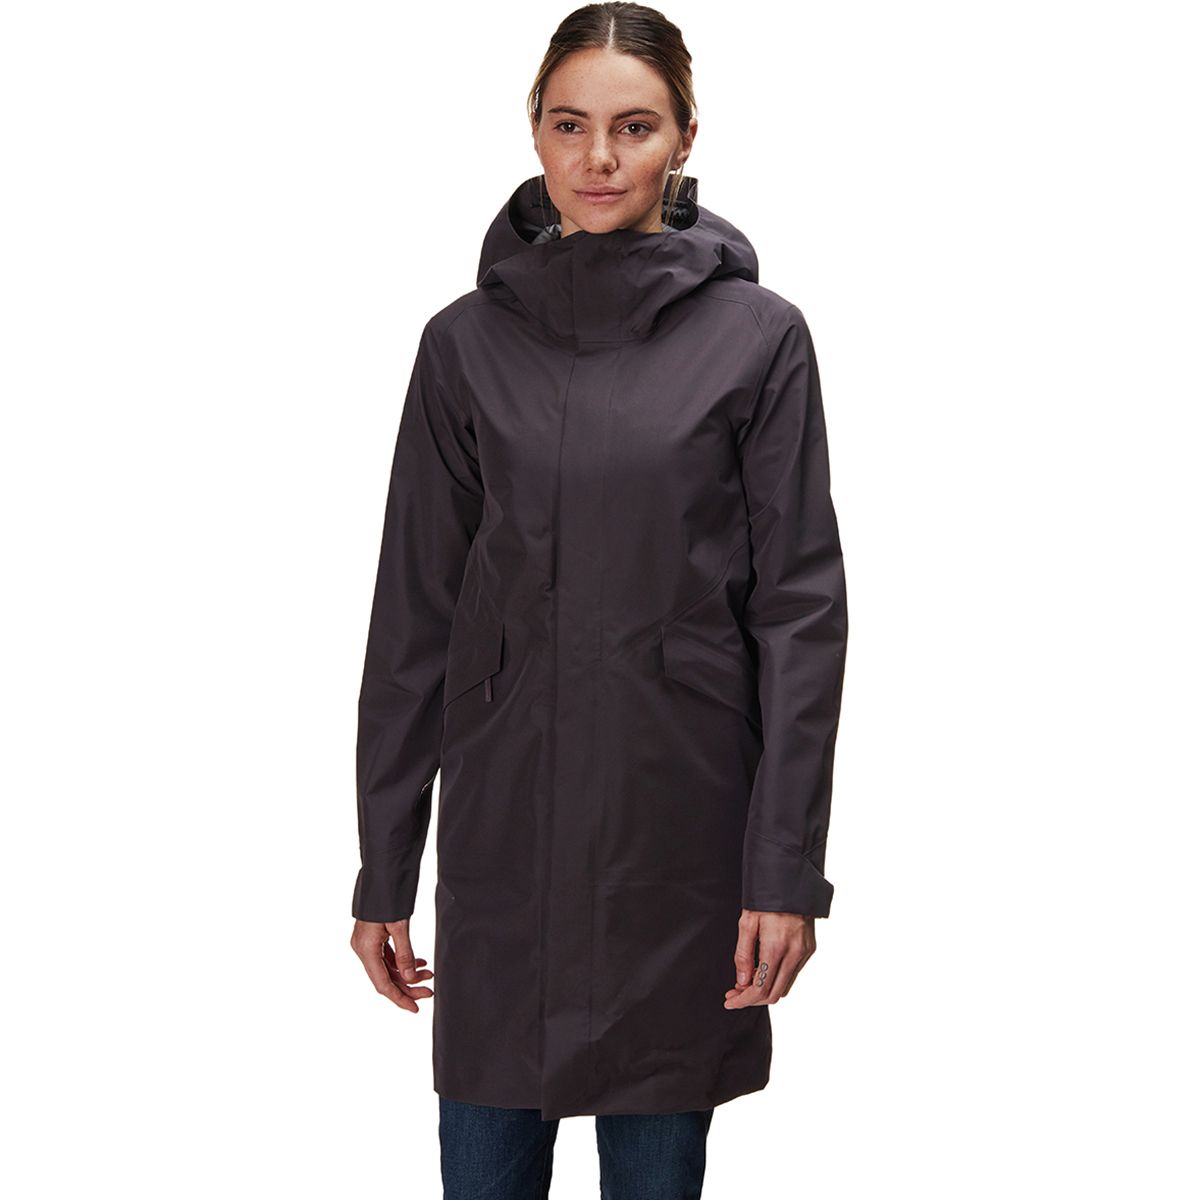 Arc'teryx - Women's Jackets, Coats, Cold Weather Parkas. Sustainable ...